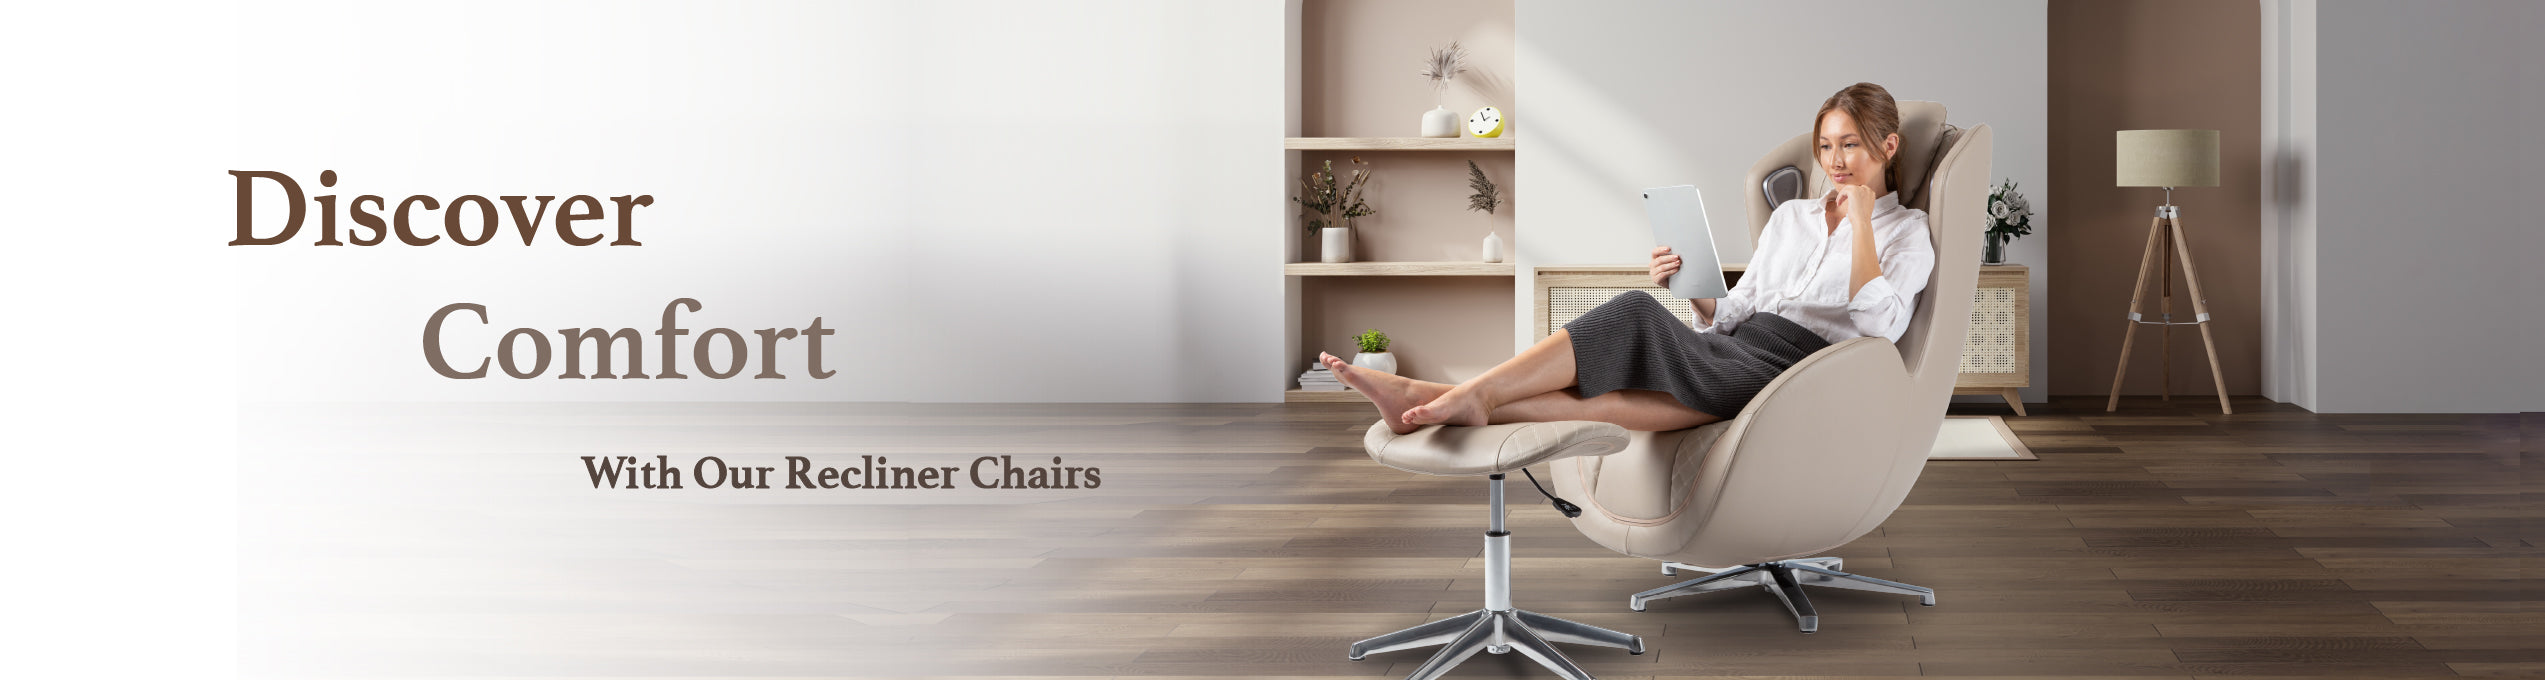 Discover Comfort with our Recliner Chairs